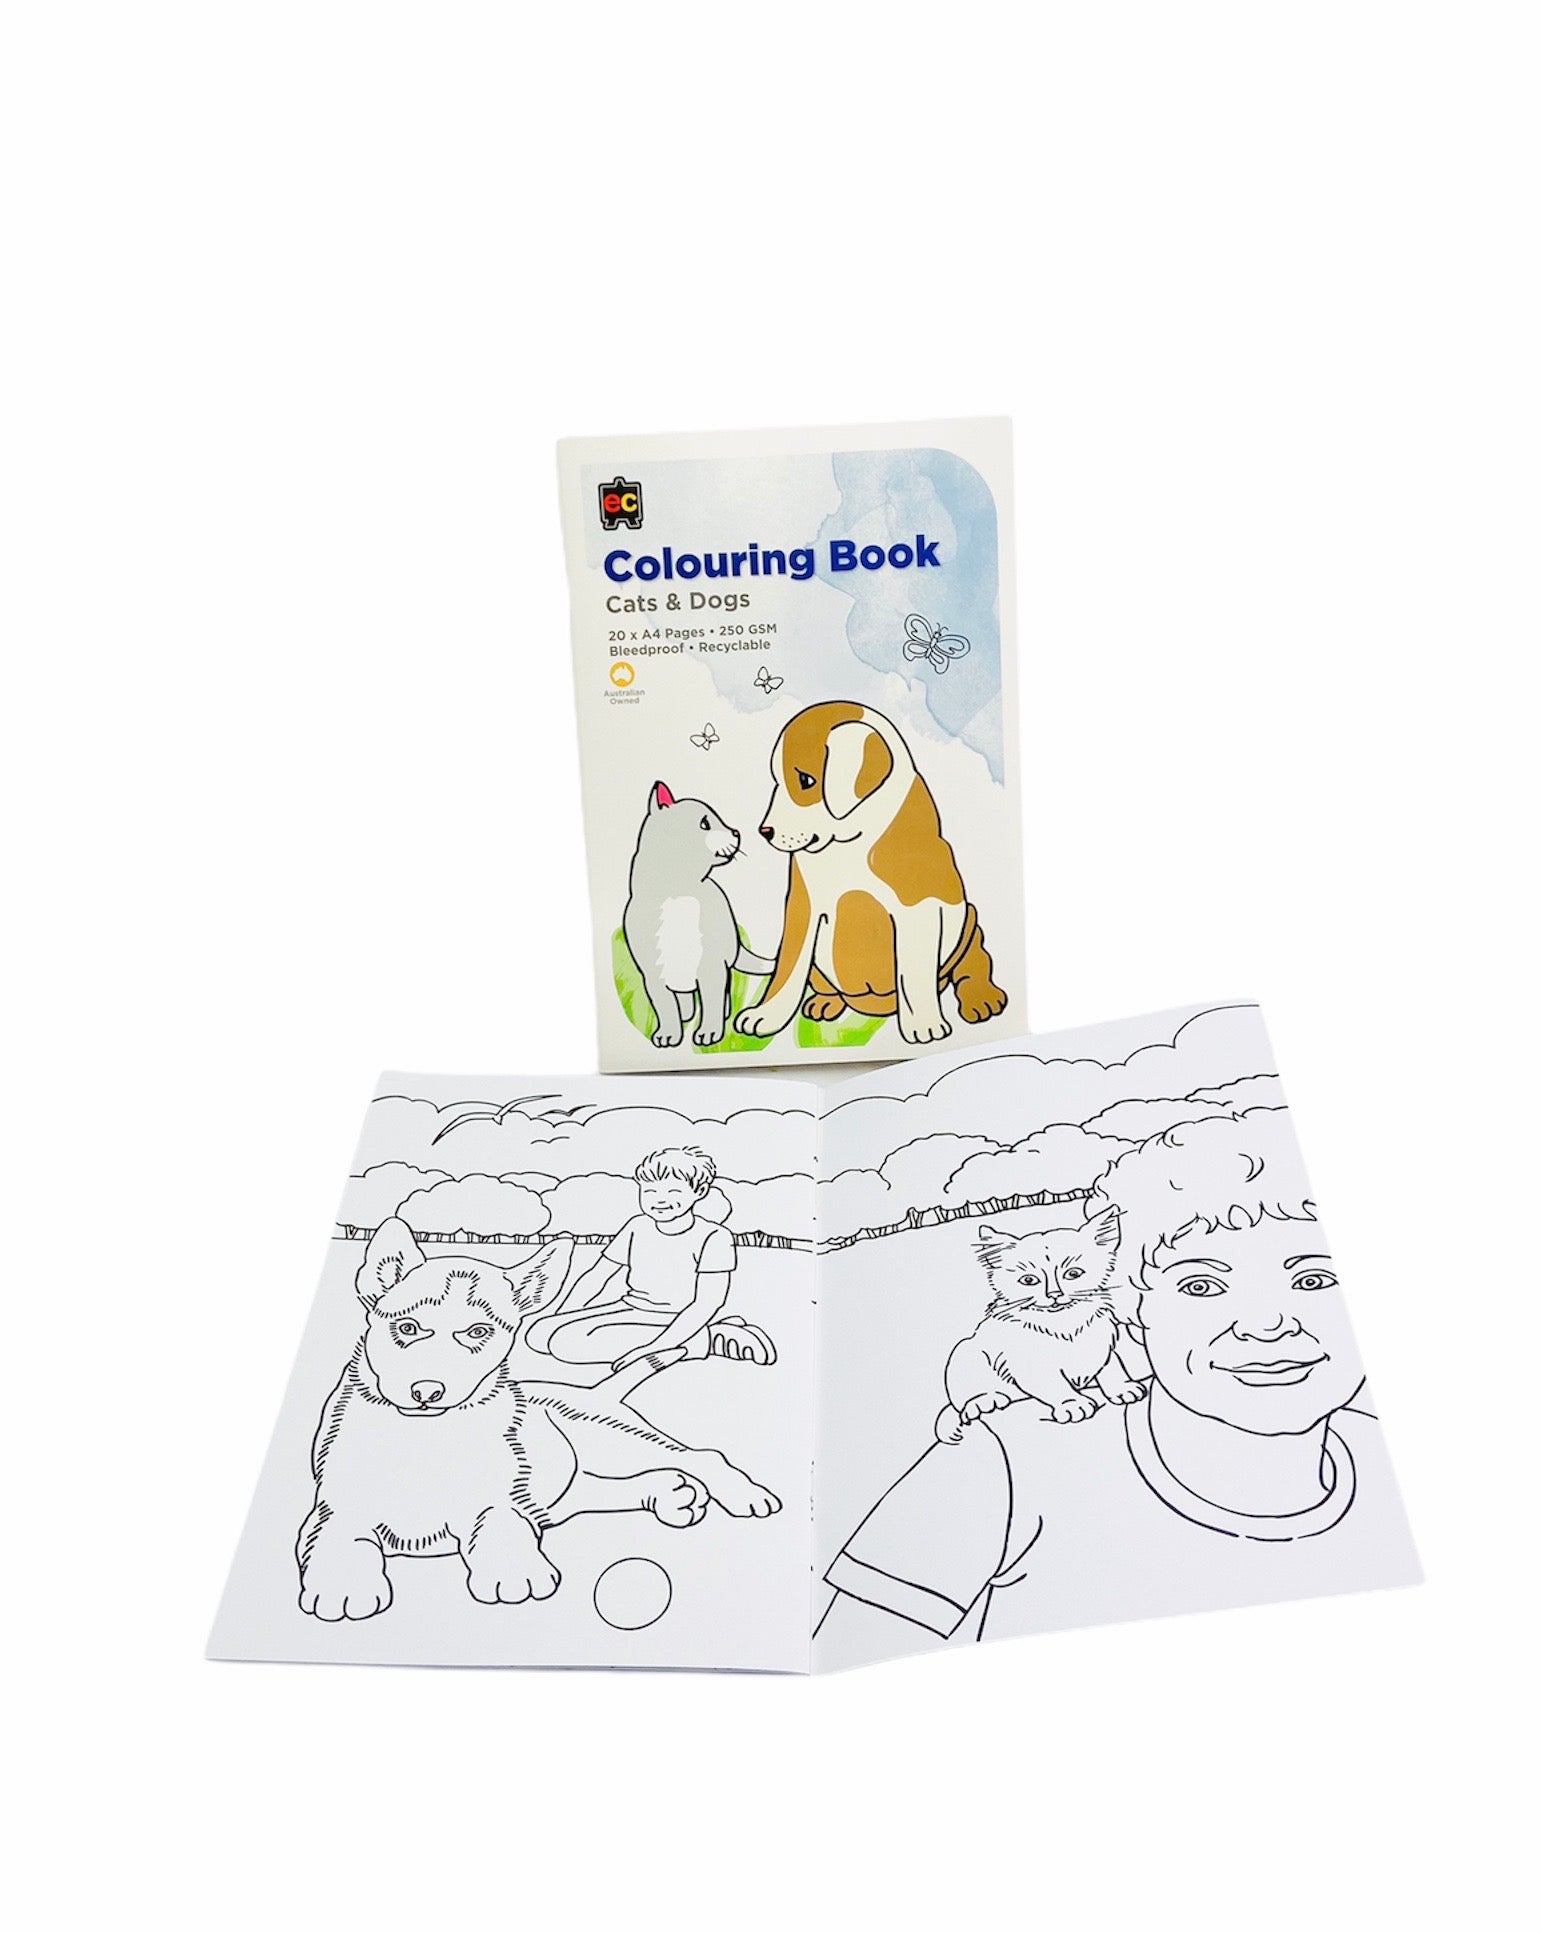 Colouring Book - Cats & Dogs with open page on a white background